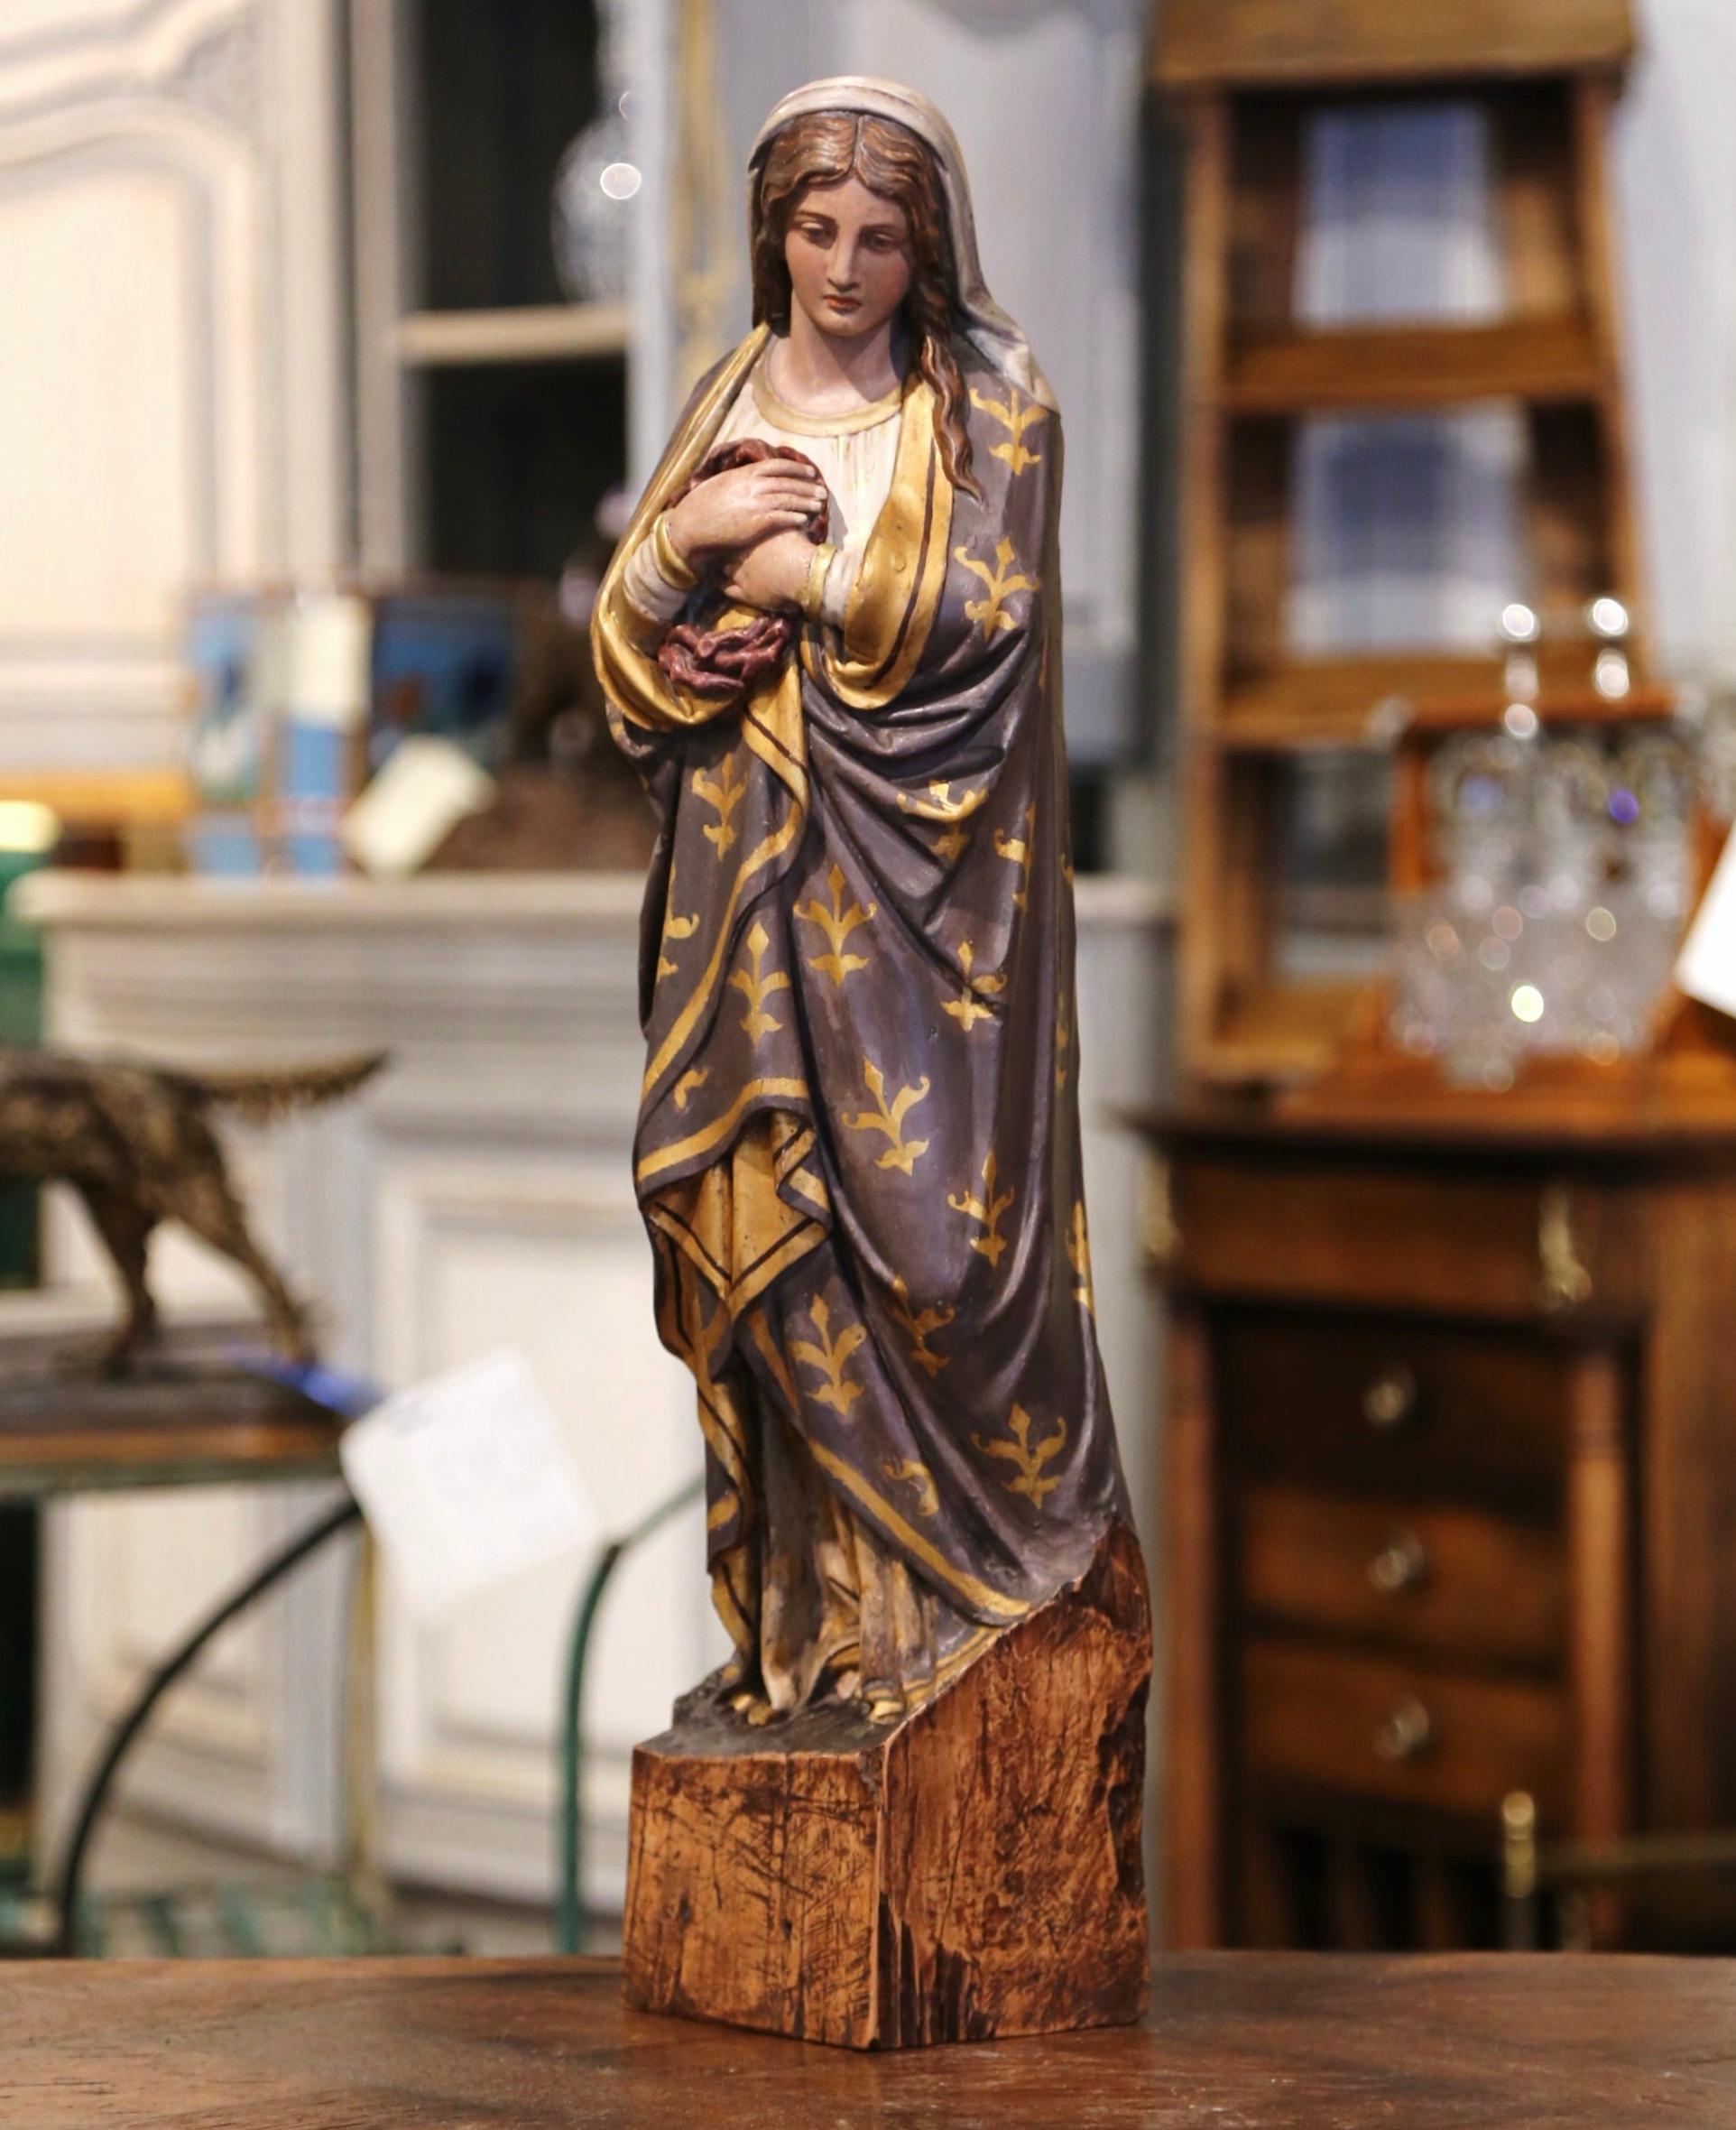 Walnut Mid-19th Century French Carved Giltwood and Polychrome Virgin Mary Statue